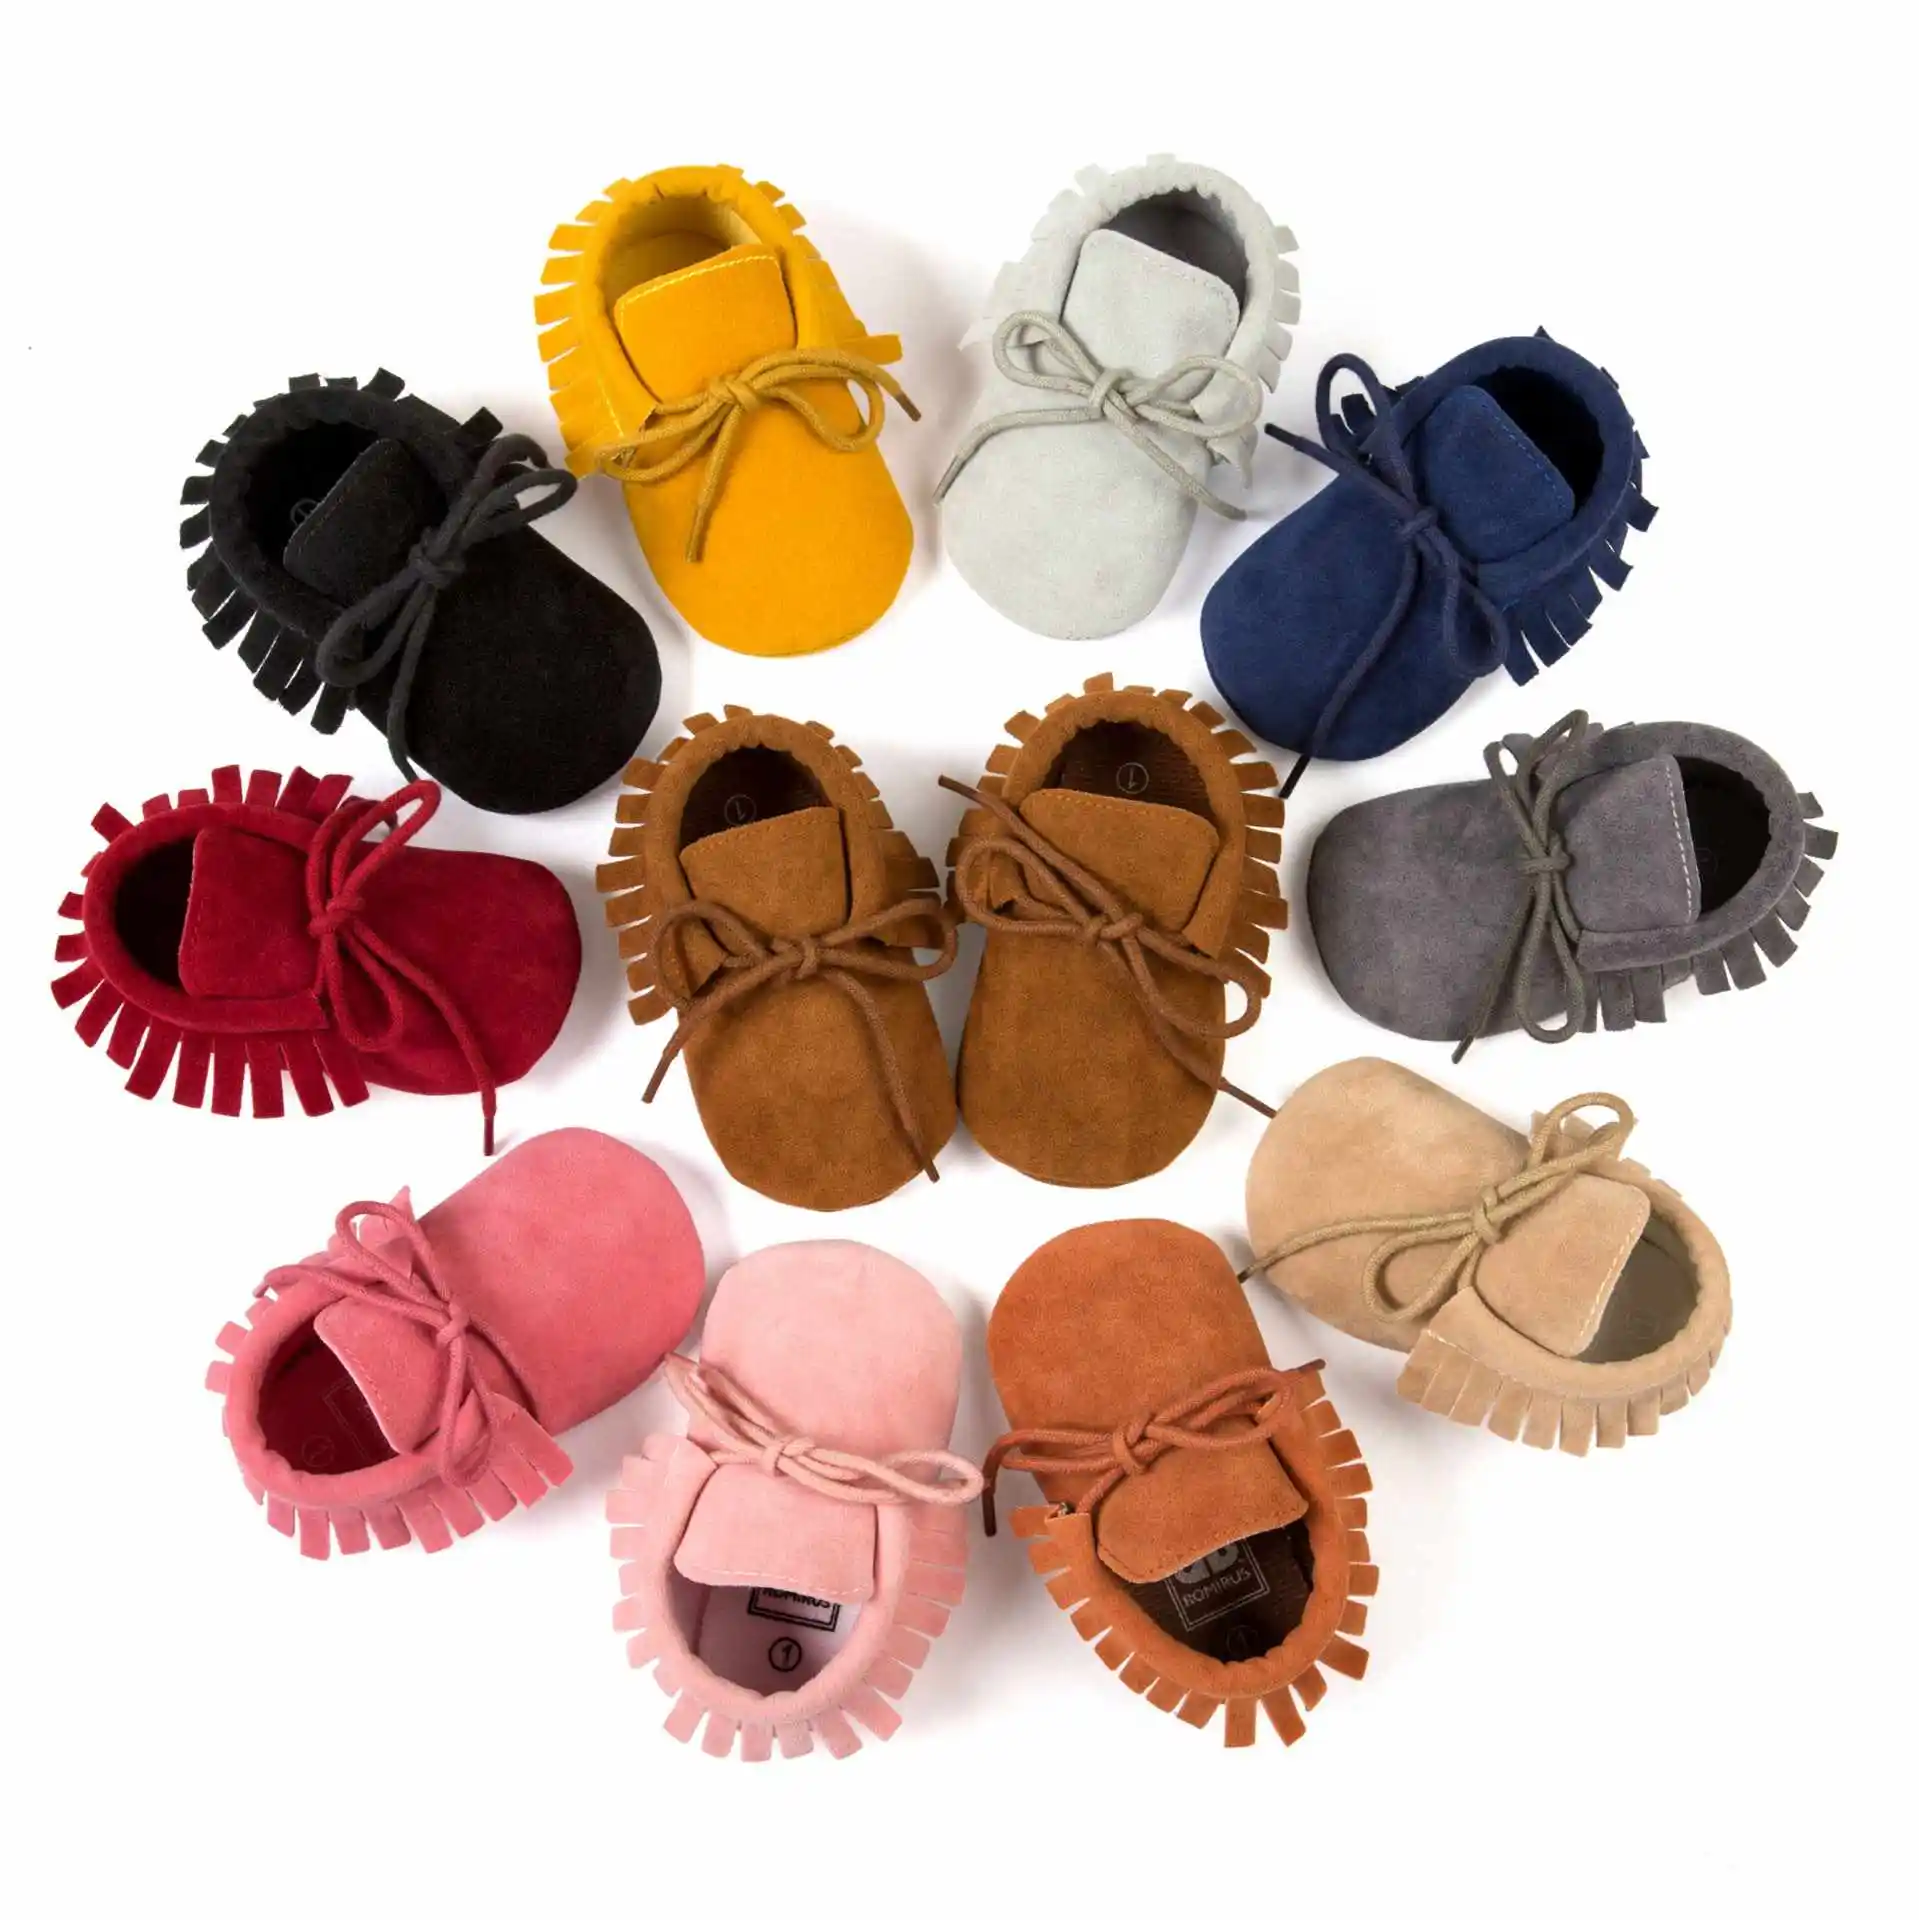 Wholesale Hot sale Soft Sole baby shoes Moccasin girls Baby First Walker Shoes Toddler PU Leather Non-Slip Newborn Infant Shoes